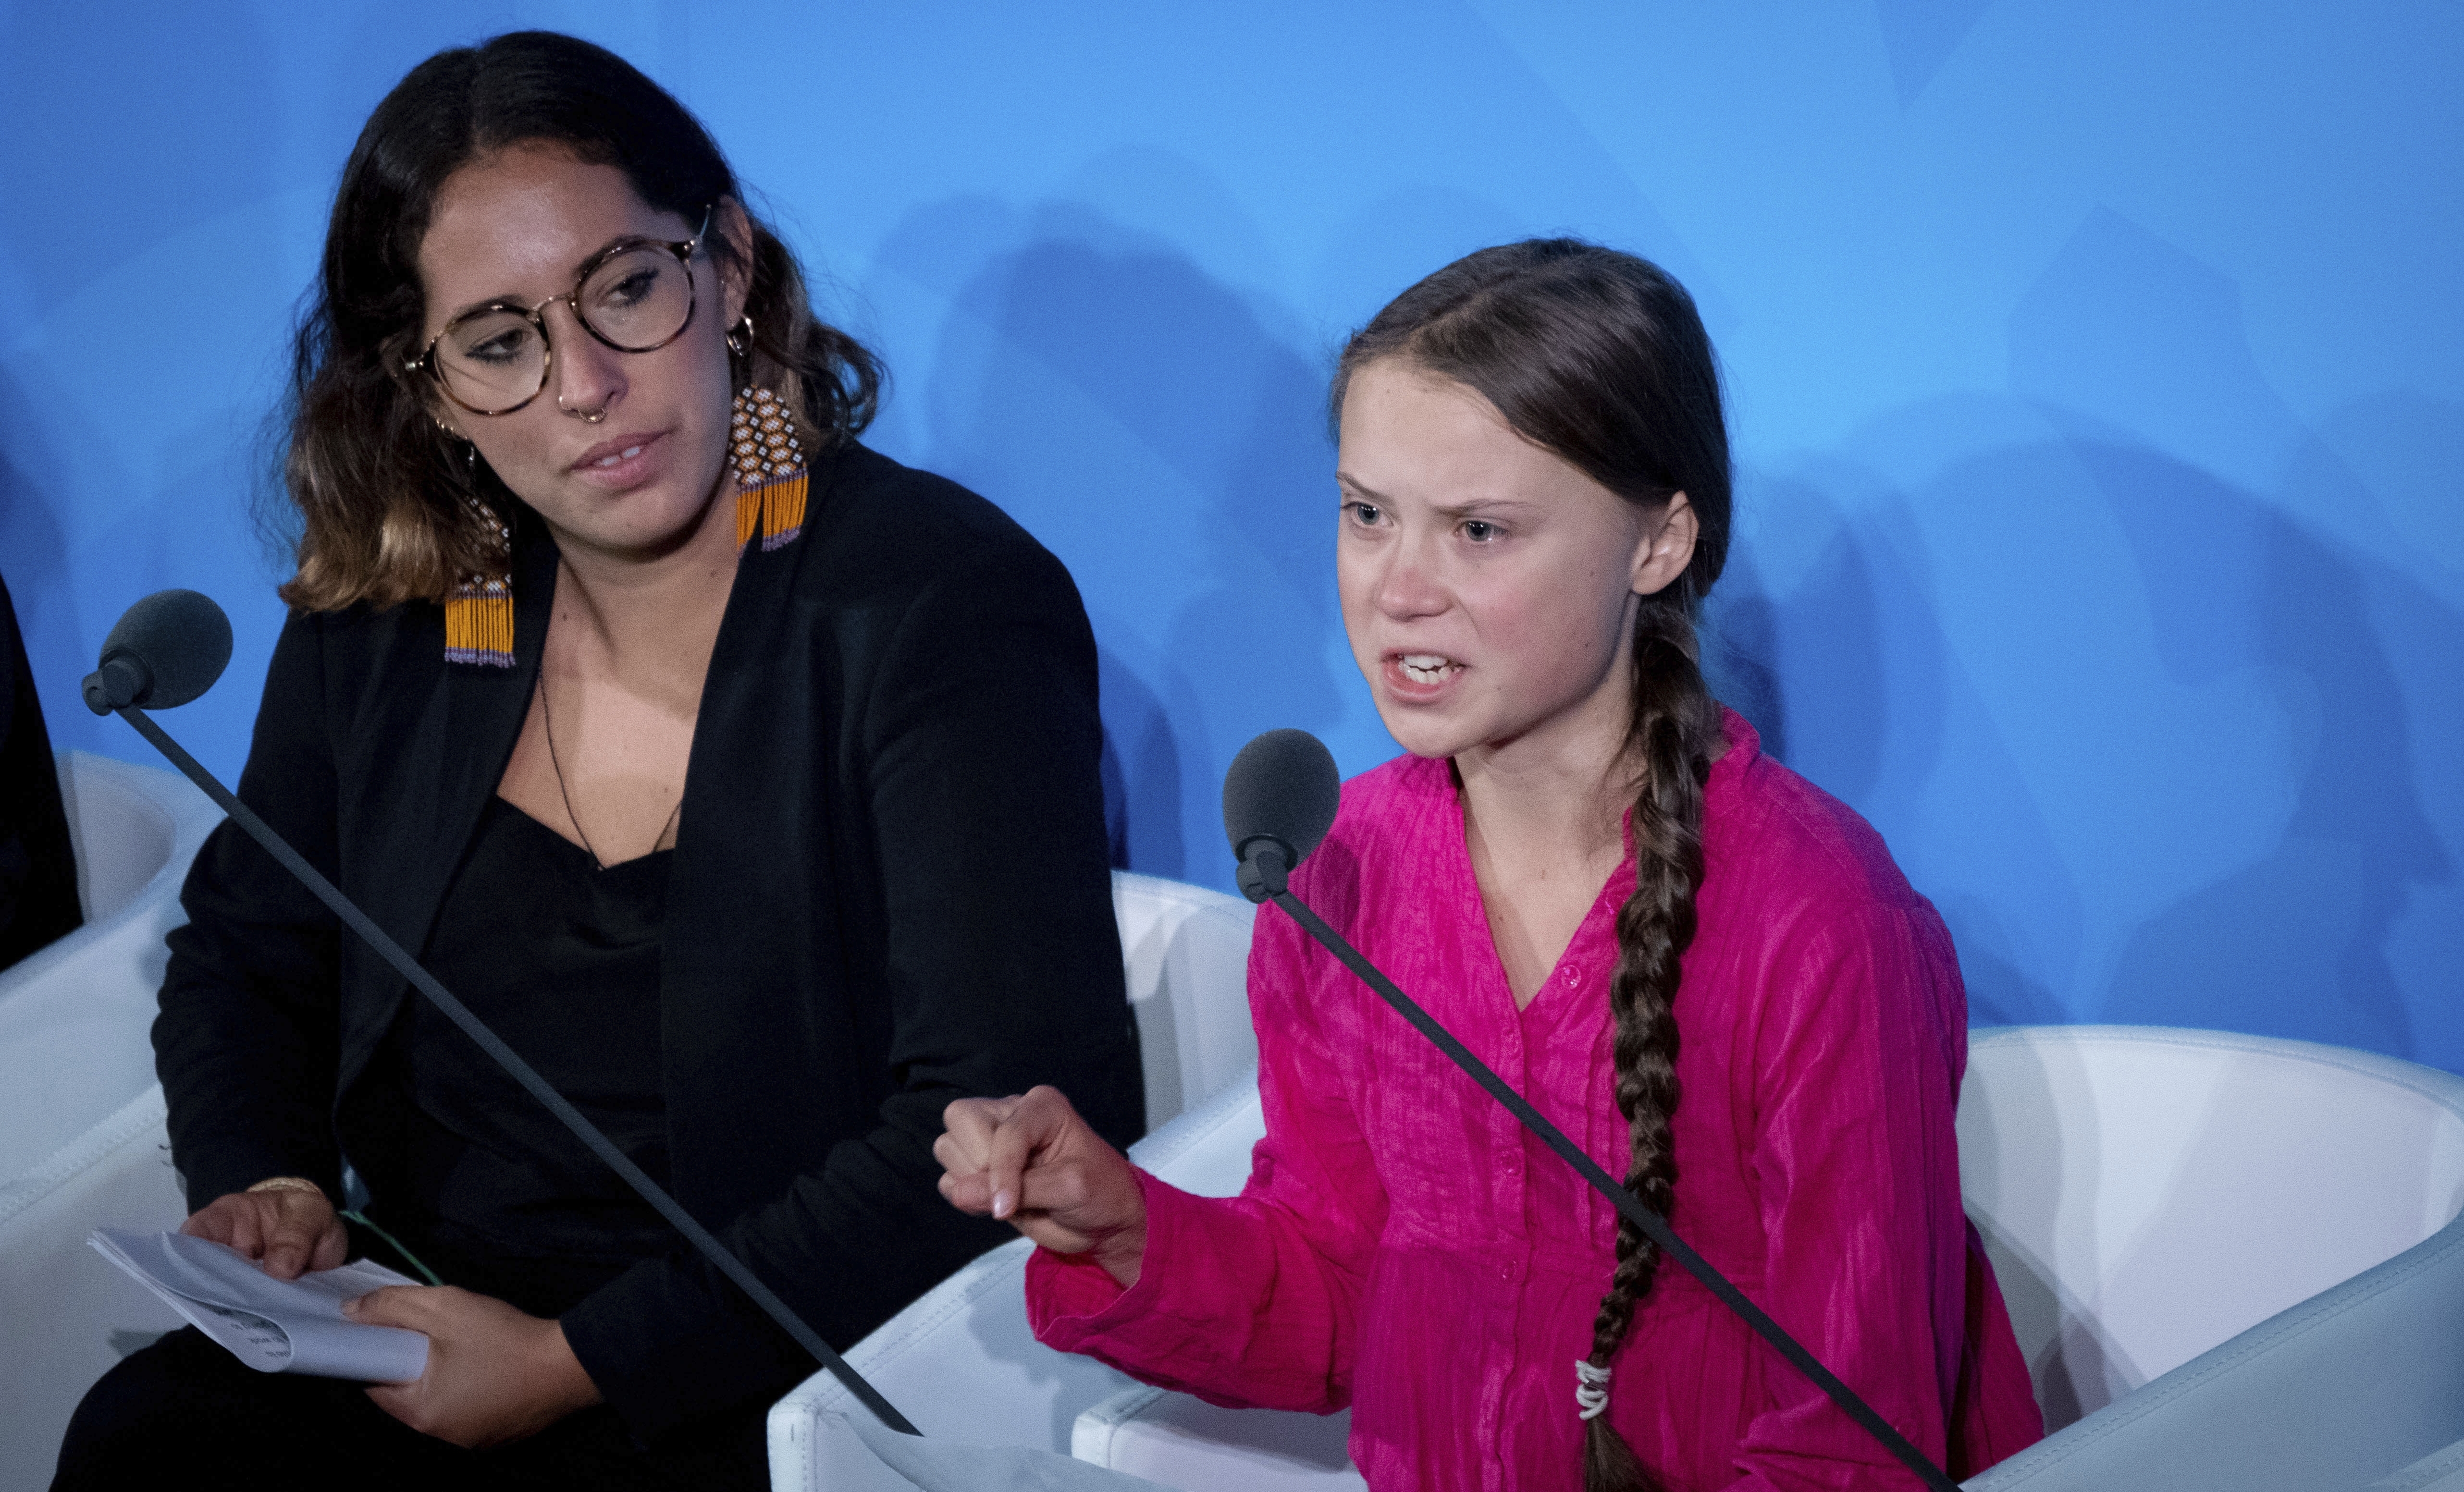 dpatop - 23 September 2019, US, New York: Climate activist Greta Thunberg (r) speaks at the United Nations Climate Change Conference. The United Nations expects more than 60 heads of state and government to present concrete, new plans to reduce CO2 emissions in short speeches lasting a maximum of three minutes. On the left is the Brazilian climate activist Paloma Costa. Photo by: Kay Nietfeld/picture-alliance/dpa/AP Images